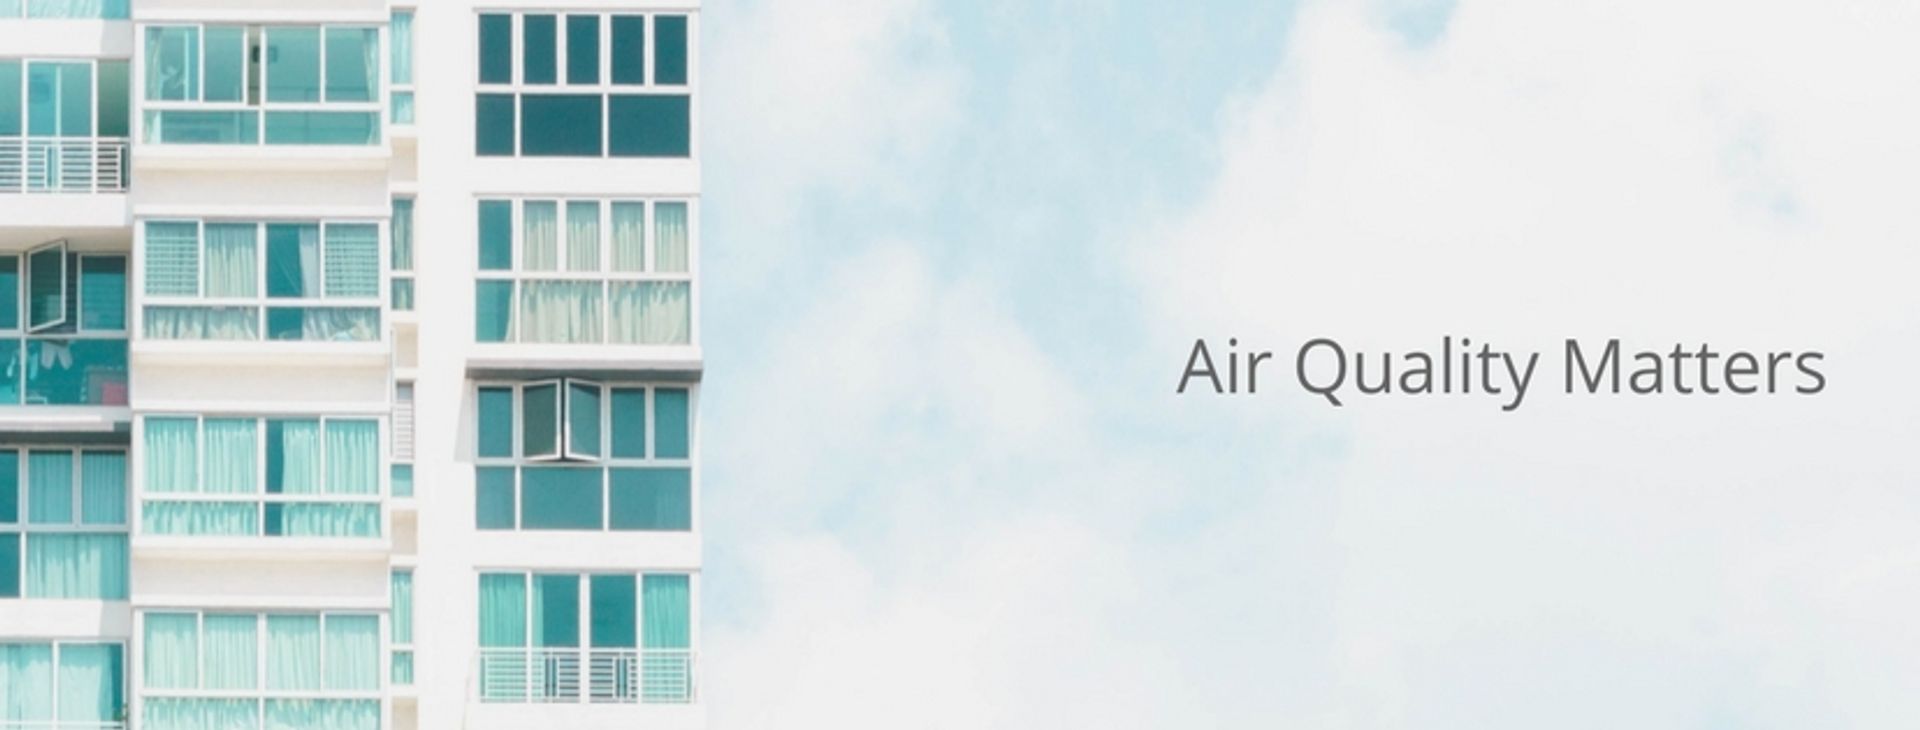 Asia Pacific Air Quality Group Pte Ltd